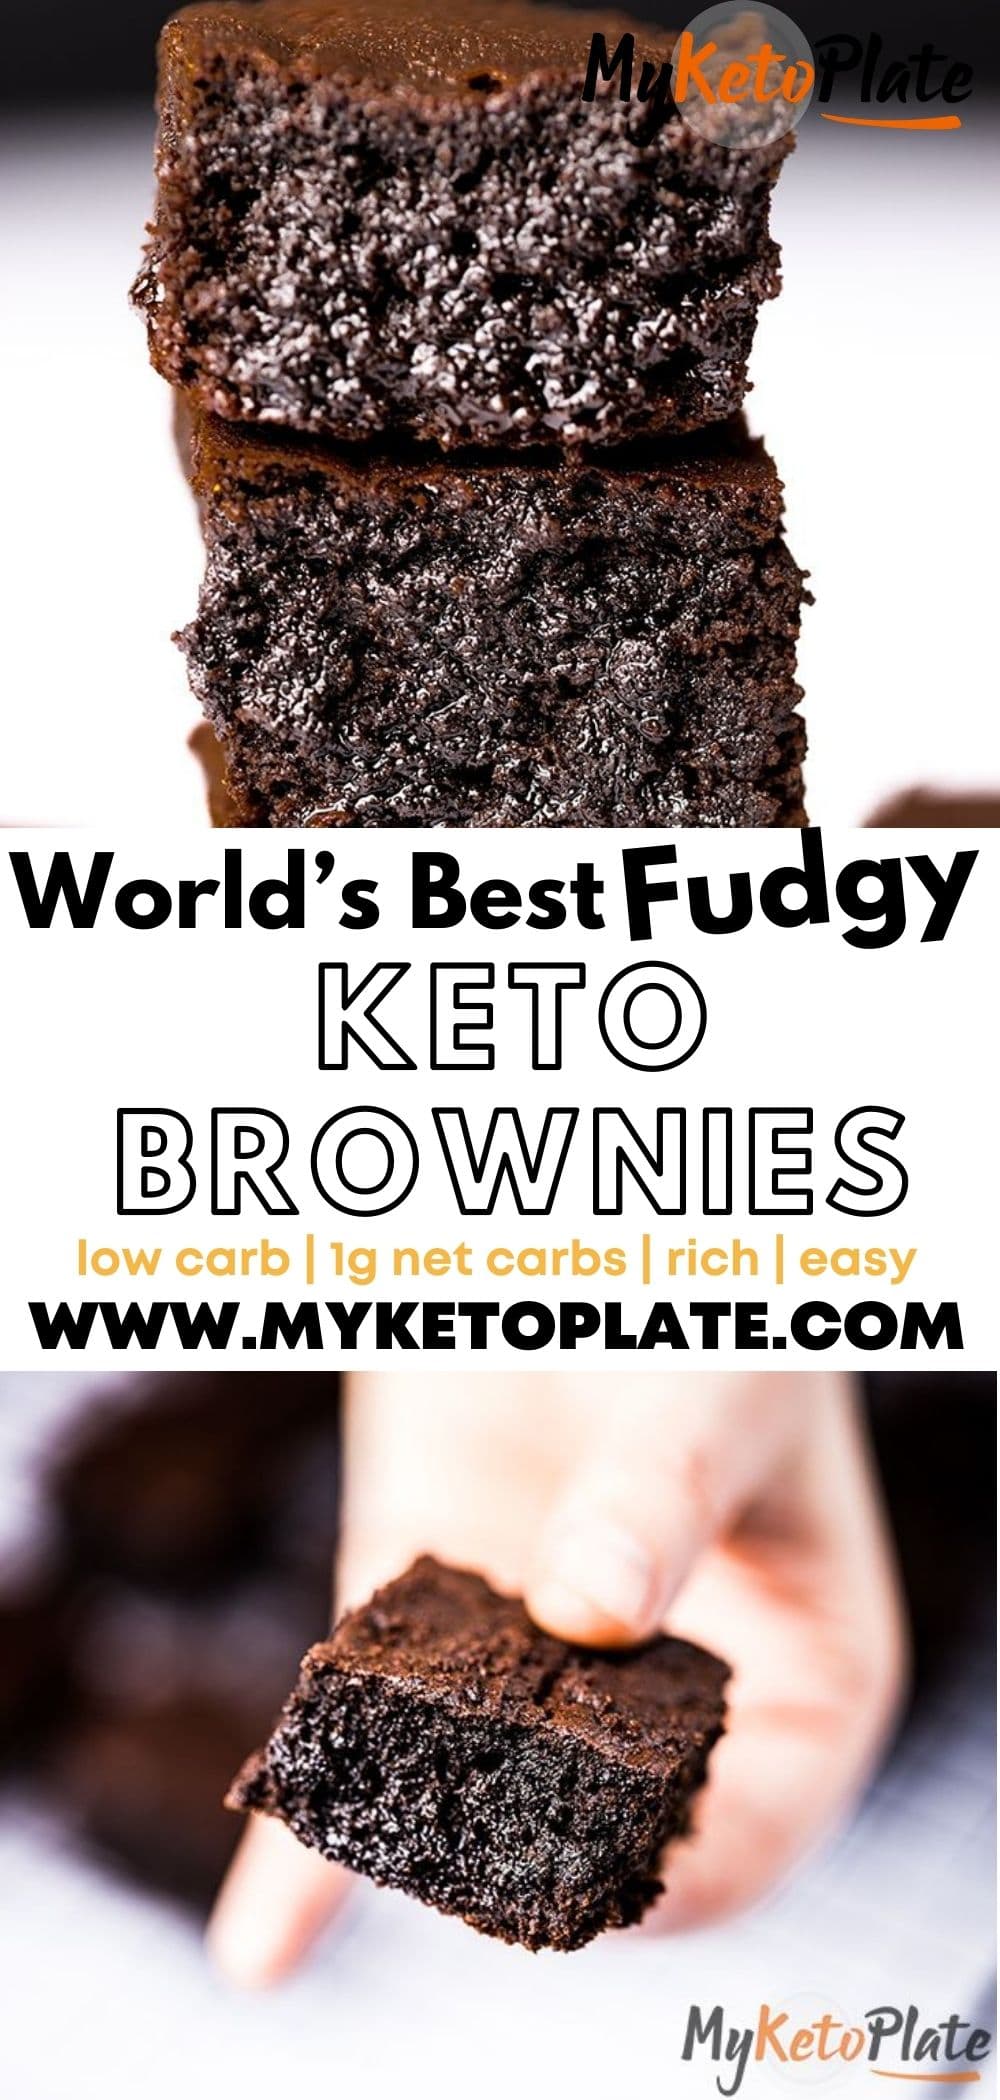 The Best Fudgy Keto Brownies Recipe (Only 1 Net Carb!) - MyKetoPlate